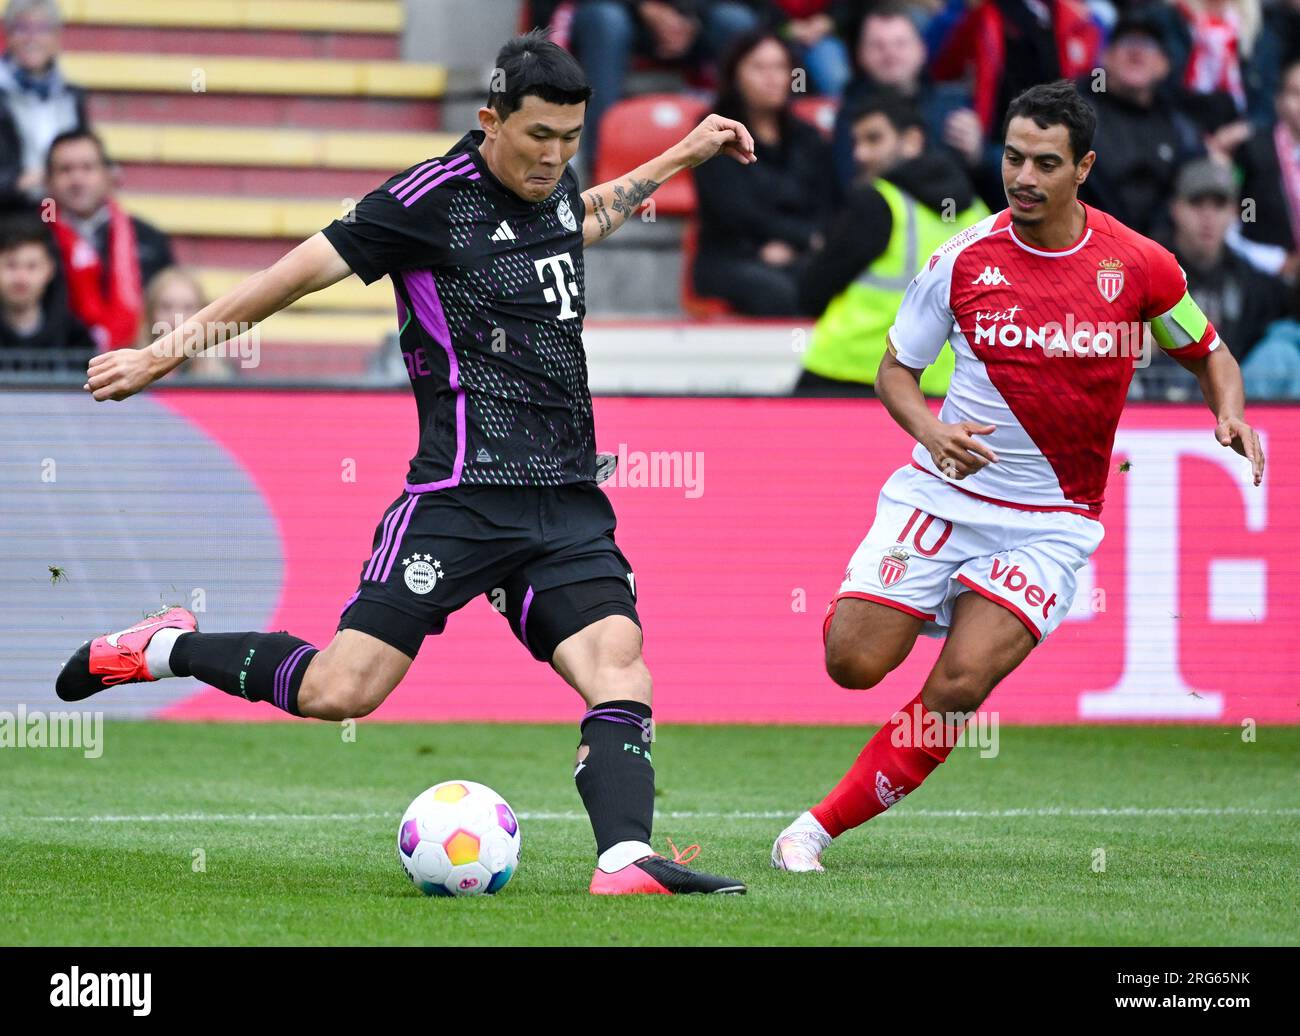 Unterhaching, Germany. 07th Aug, 2023. Soccer: Test matches, FC Bayern München - AS Monaco at Alpenbauer Sportpark. Min-Jae Kim (l) of Munich and Wissam Ben Yedder of Monaco fight for the ball. Credit: Sven Hoppe/dpa - IMPORTANT NOTE: In accordance with the requirements of the DFL Deutsche Fußball Liga and the DFB Deutscher Fußball-Bund, it is prohibited to use or have used photographs taken in the stadium and/or of the match in the form of sequence pictures and/or video-like photo series./dpa/Alamy Live News Stock Photo